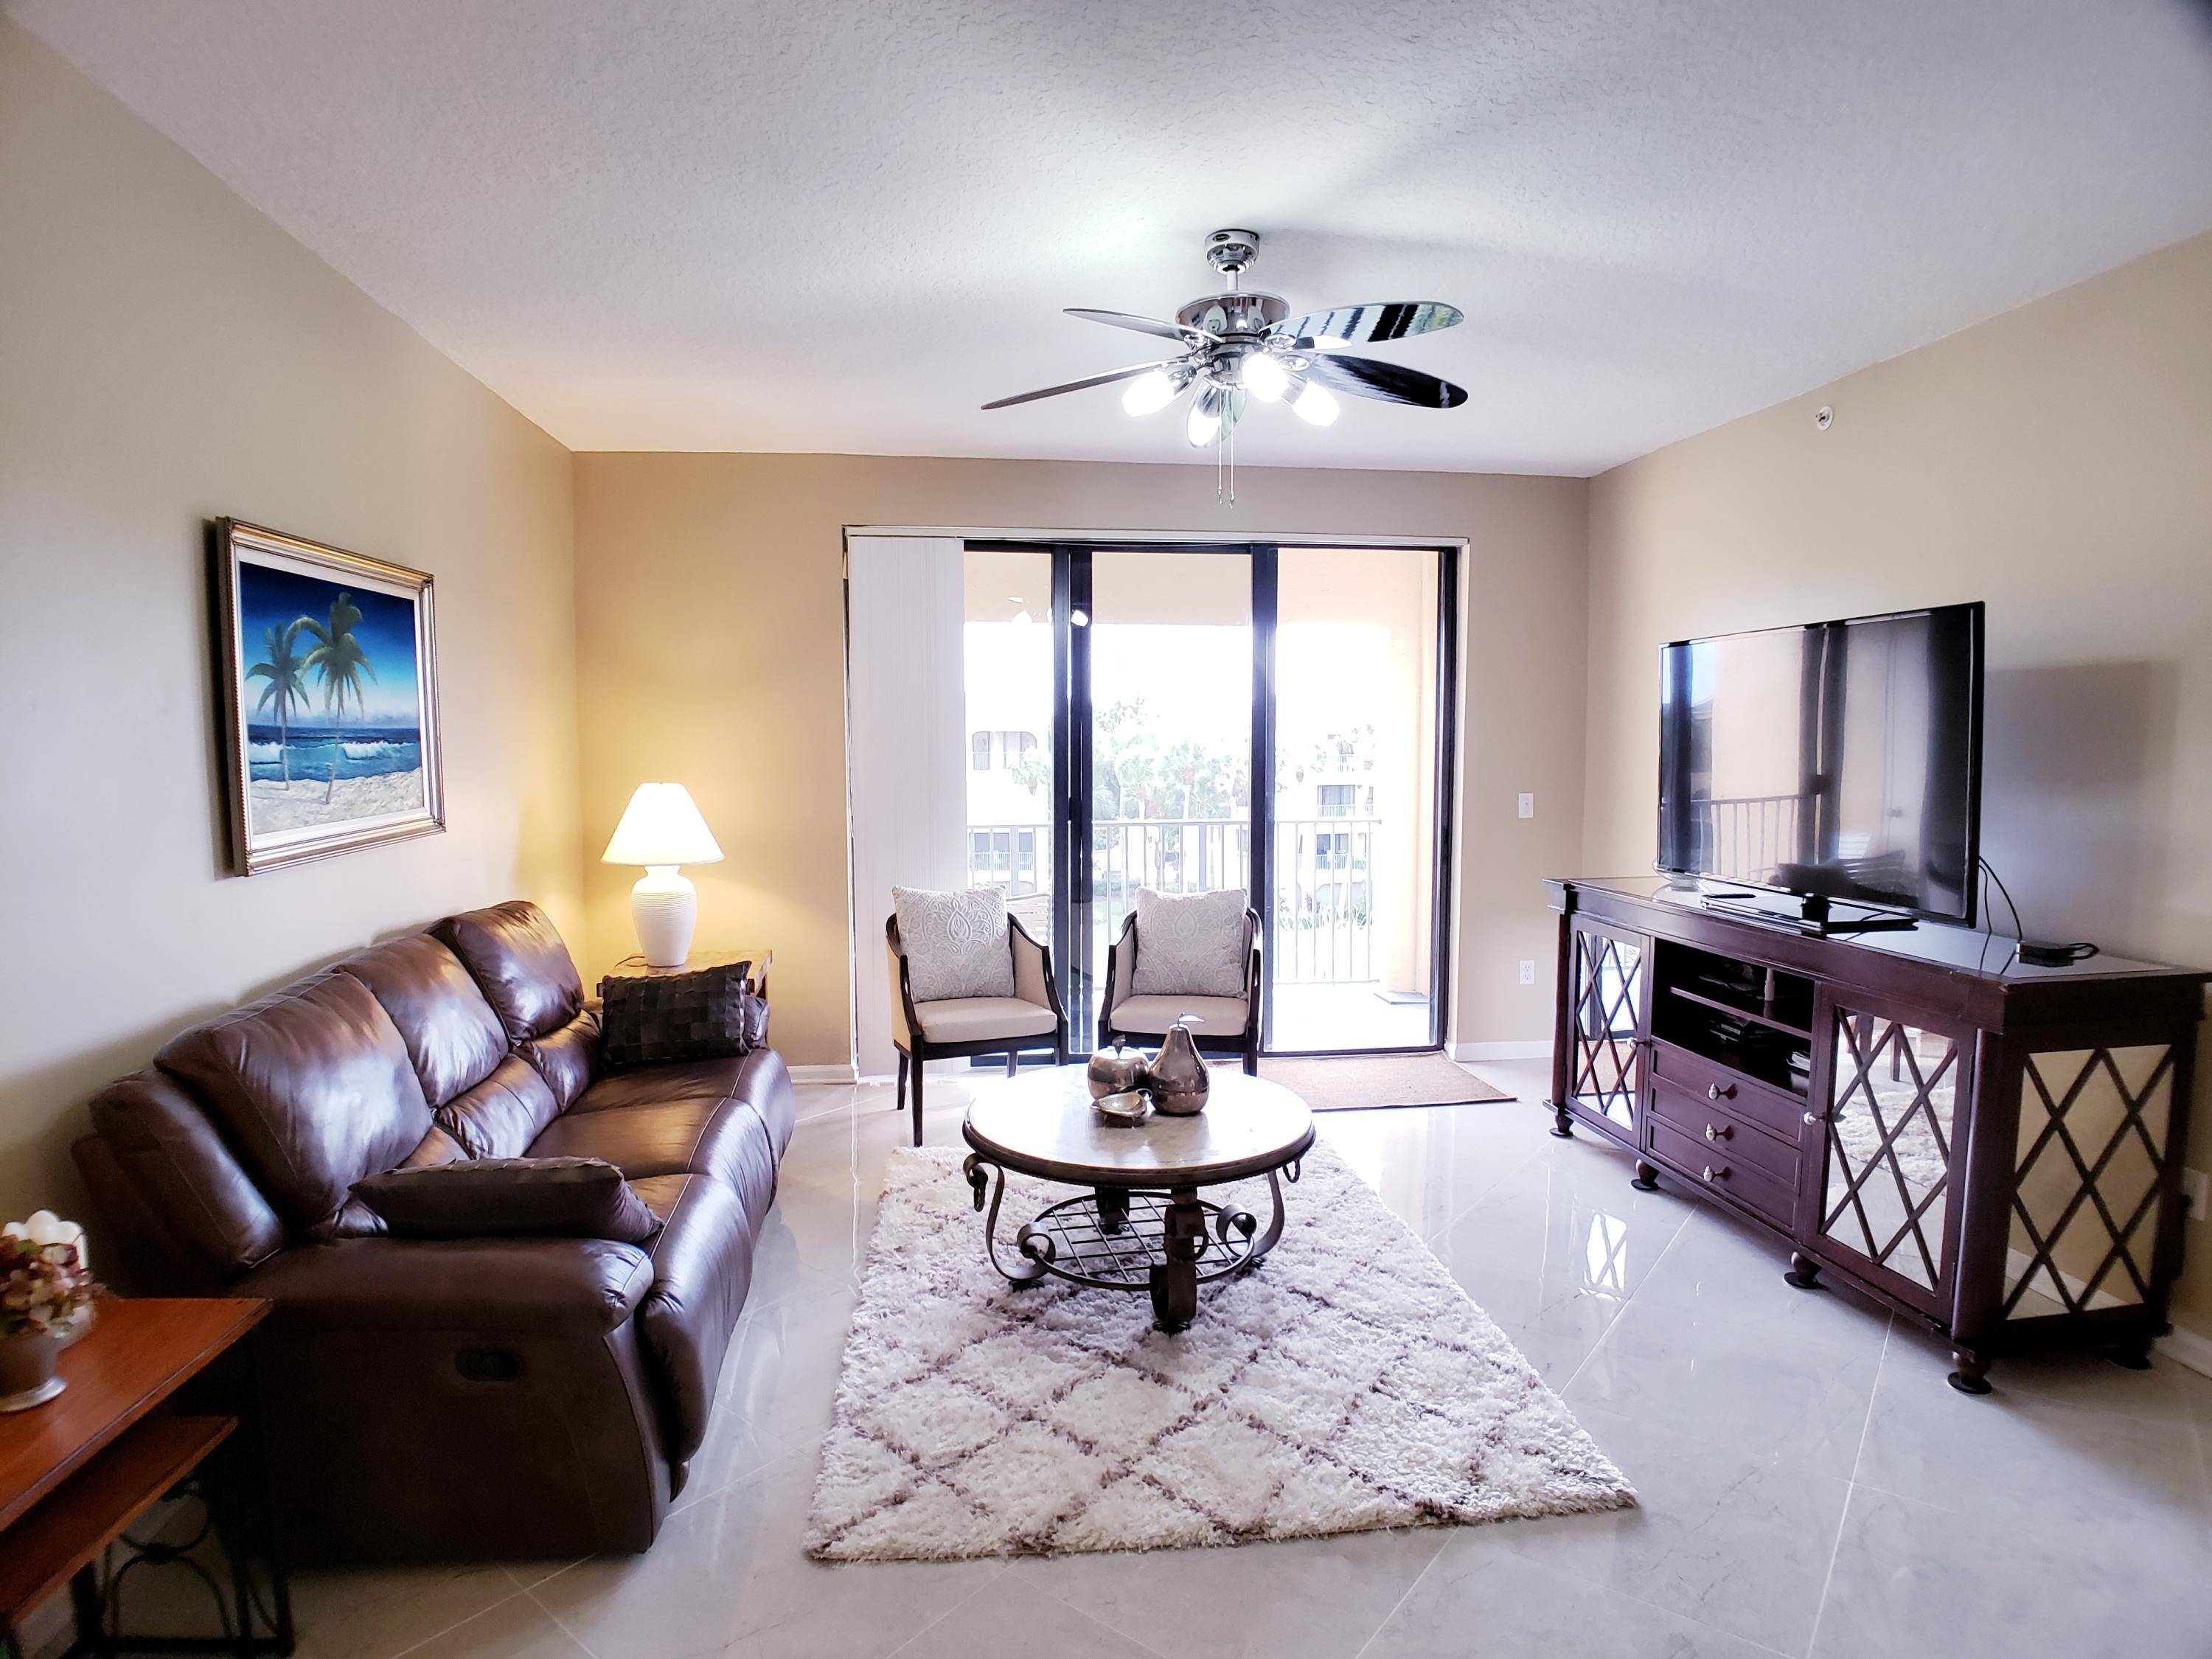 Come see this beautifully furnished 2 2 condo in this sought after development of Ocean Trace in Juno Beach.